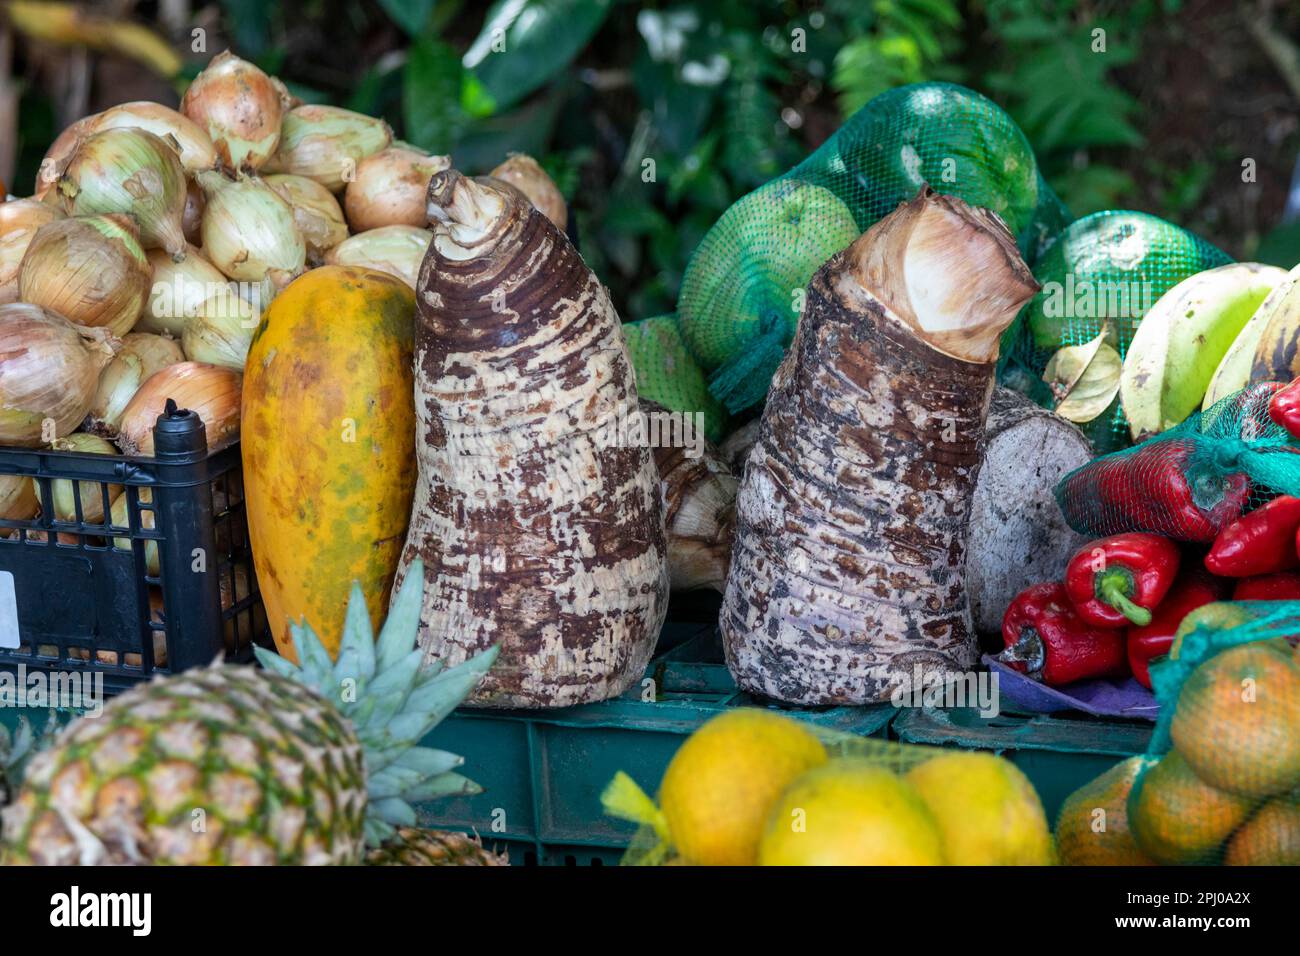 La Pavona, Costa Rica, Elephant ear root (Xanthosoma sagittifolium) among the locally-grown fruits and vegetables on sale at a produce stand Stock Photo